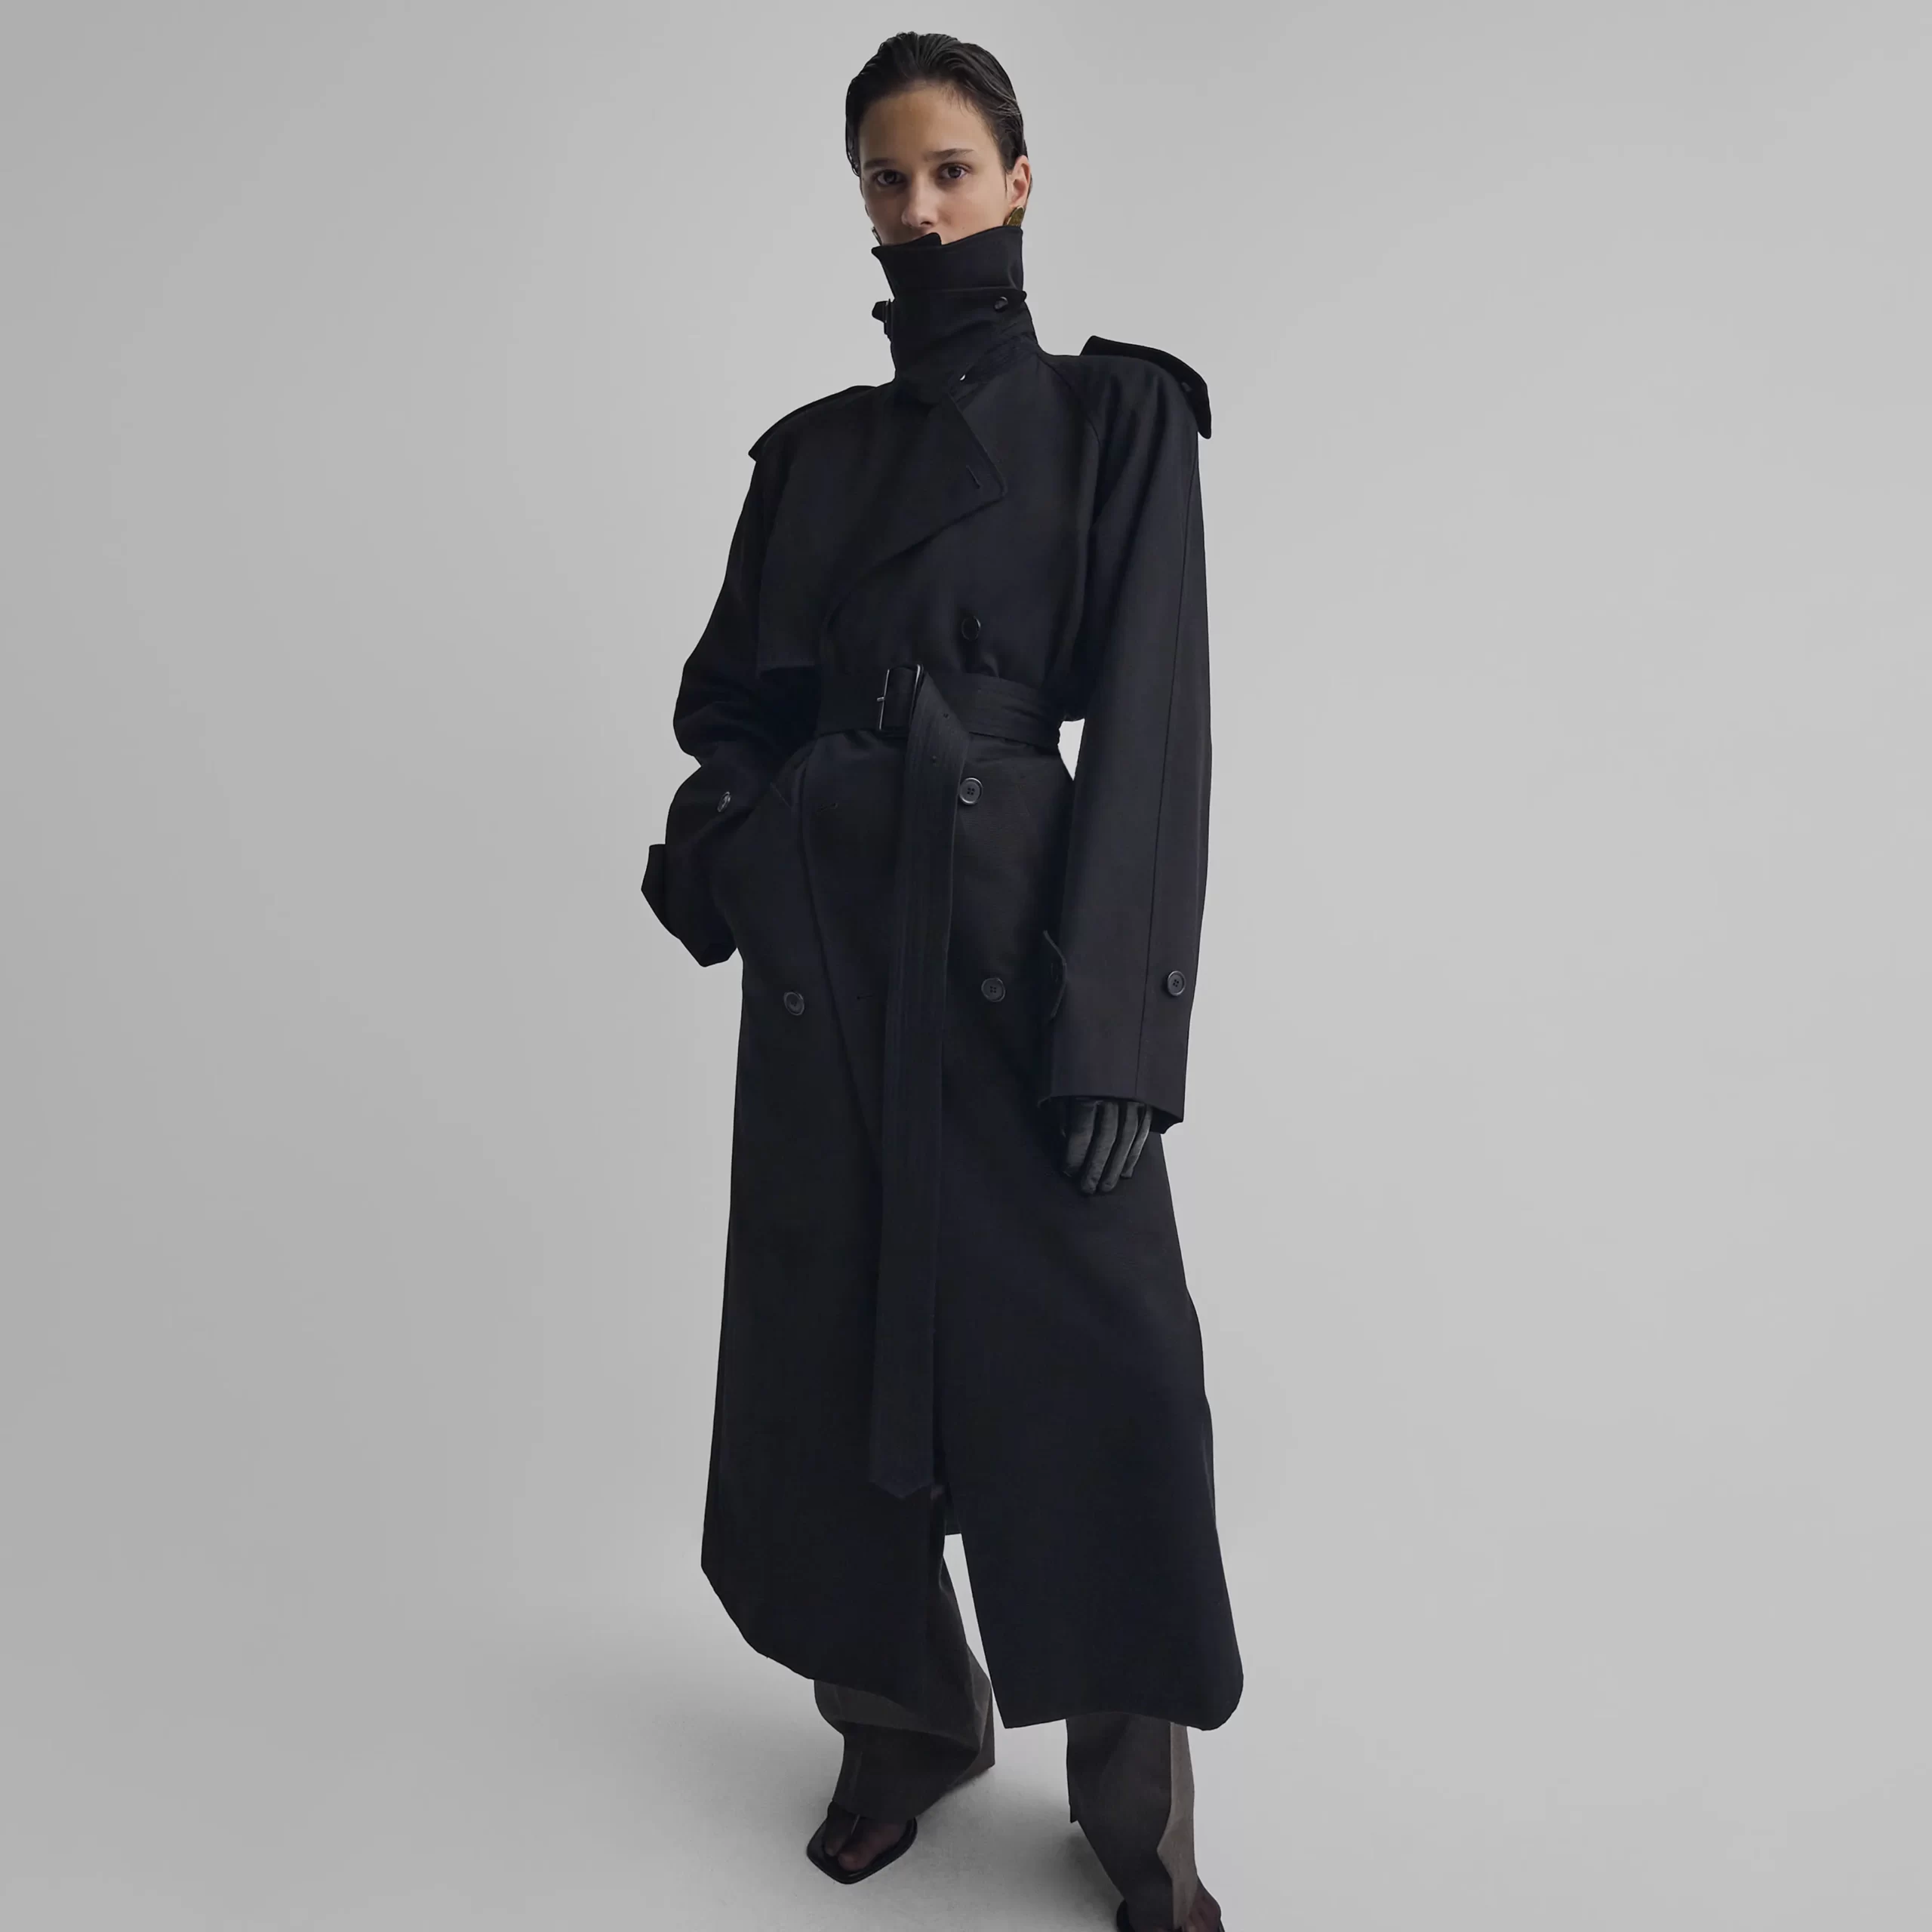 PHOEBE PHILO – MY FAVORITES FROM THE NEW COLLECTION